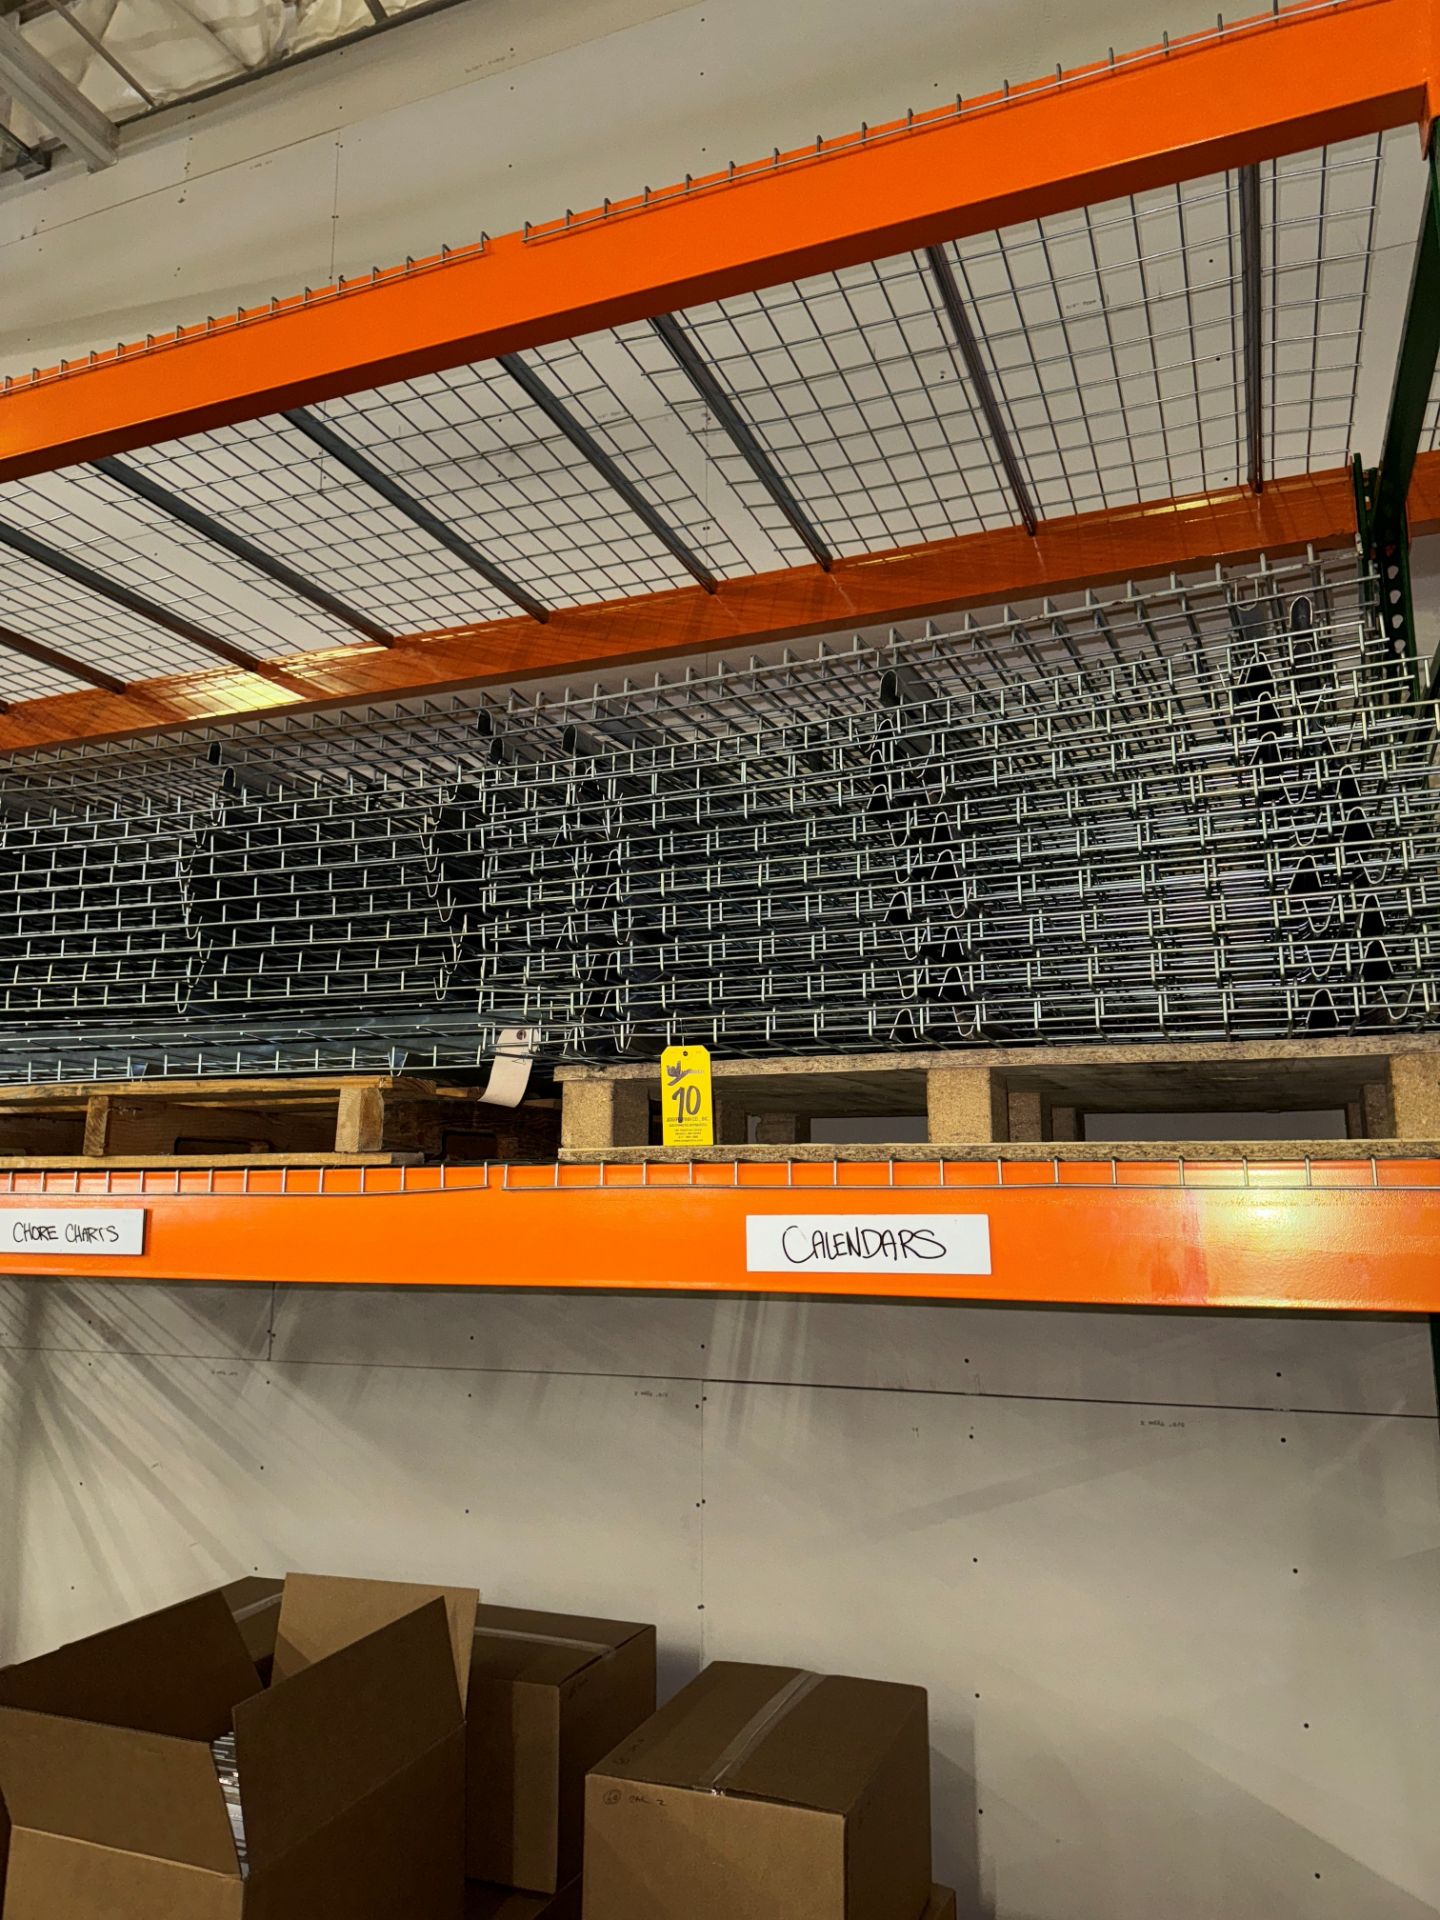 LOT (16) Sections of Asst. Orange and Green Adj. Pallet Shelving, Wire D | Rig Fee $620 - Image 4 of 5